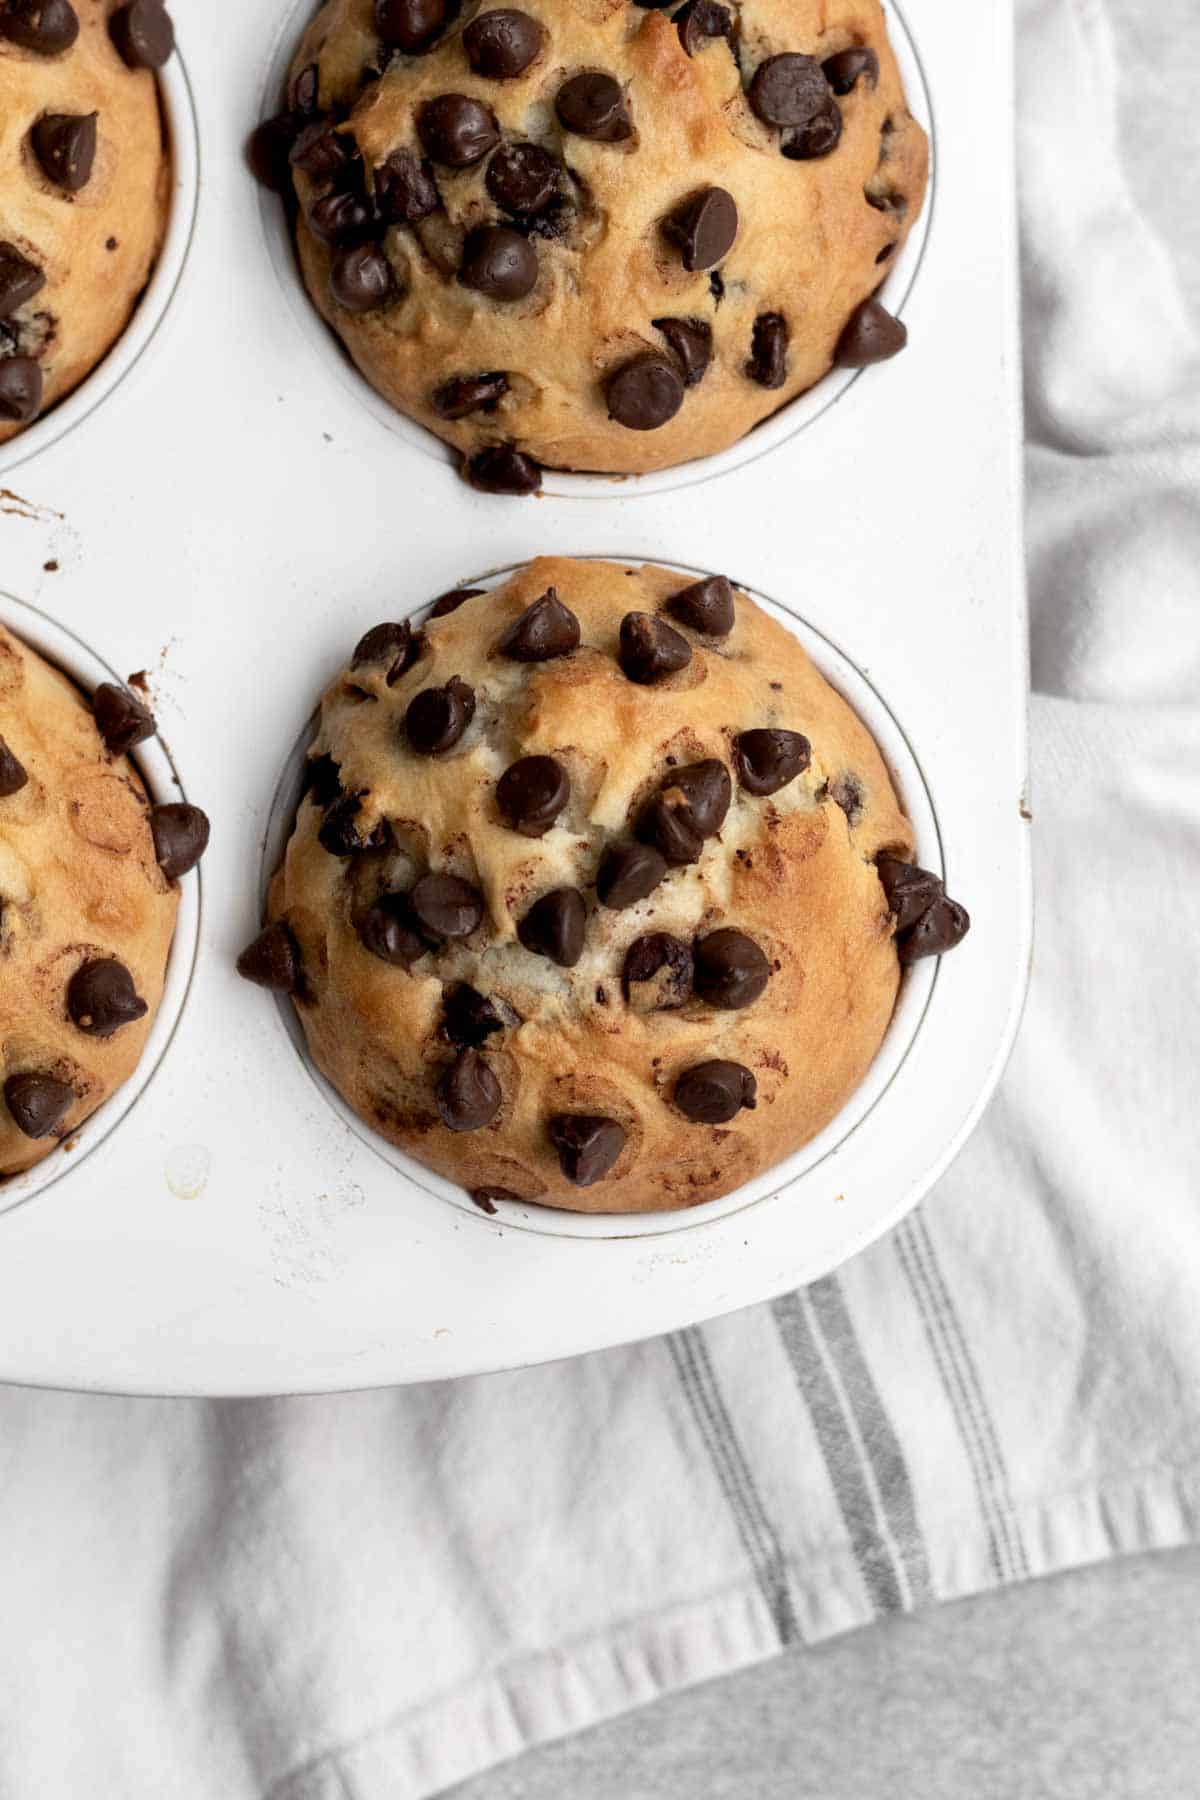 Baked chocolate chip muffins in a muffin tin.